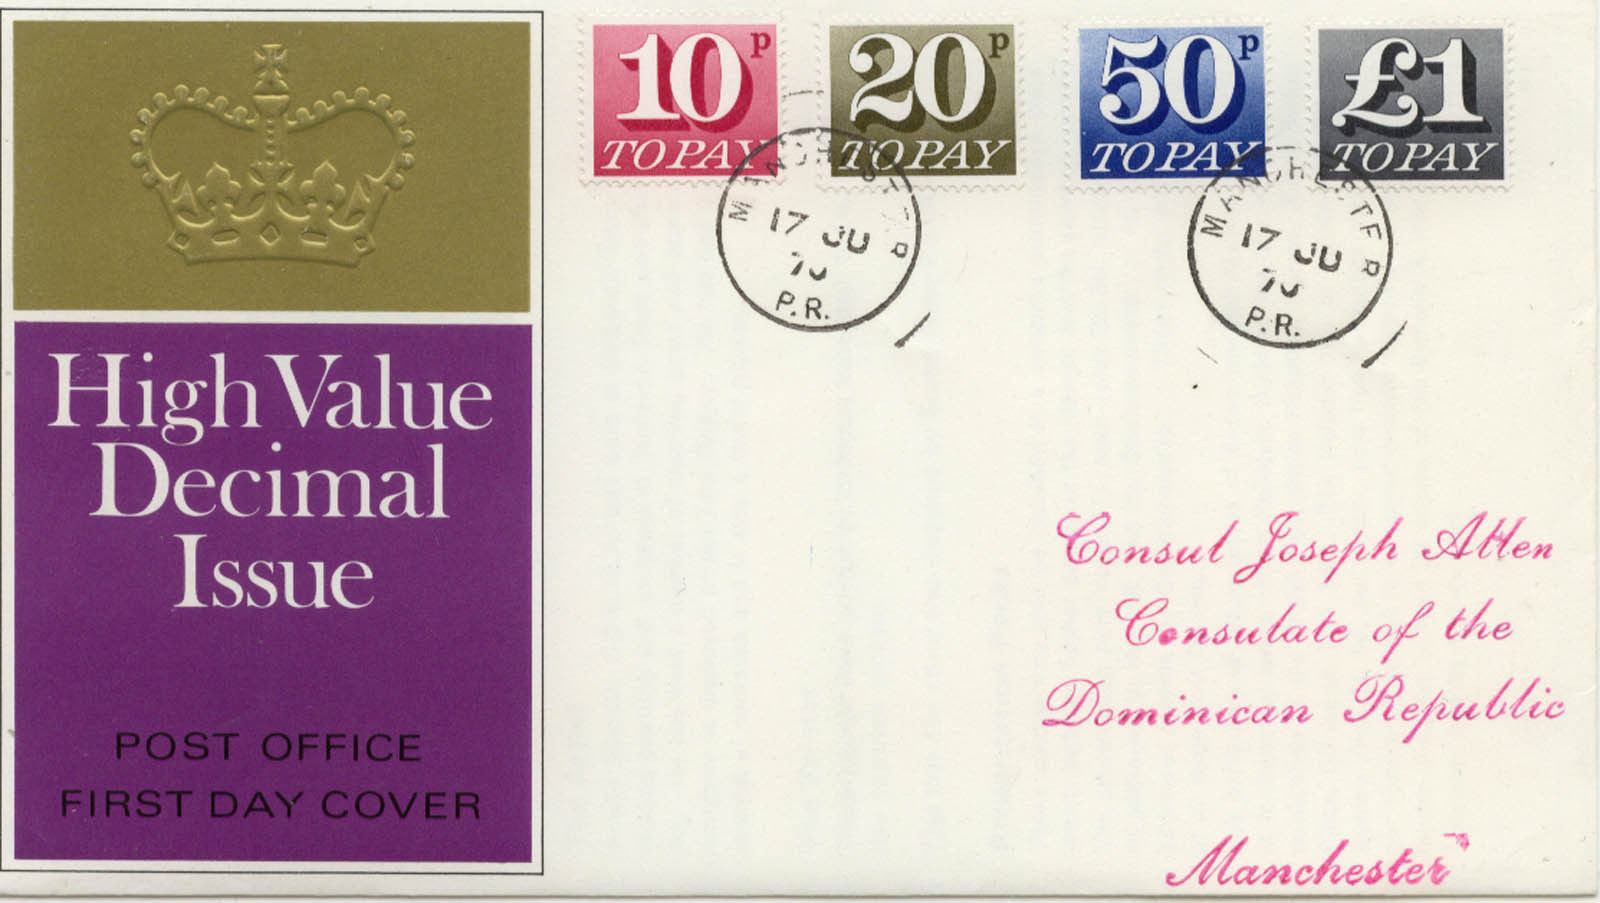 GB Postage Dues  To Pay 1970 FDC  Manchester P R CDS printed address